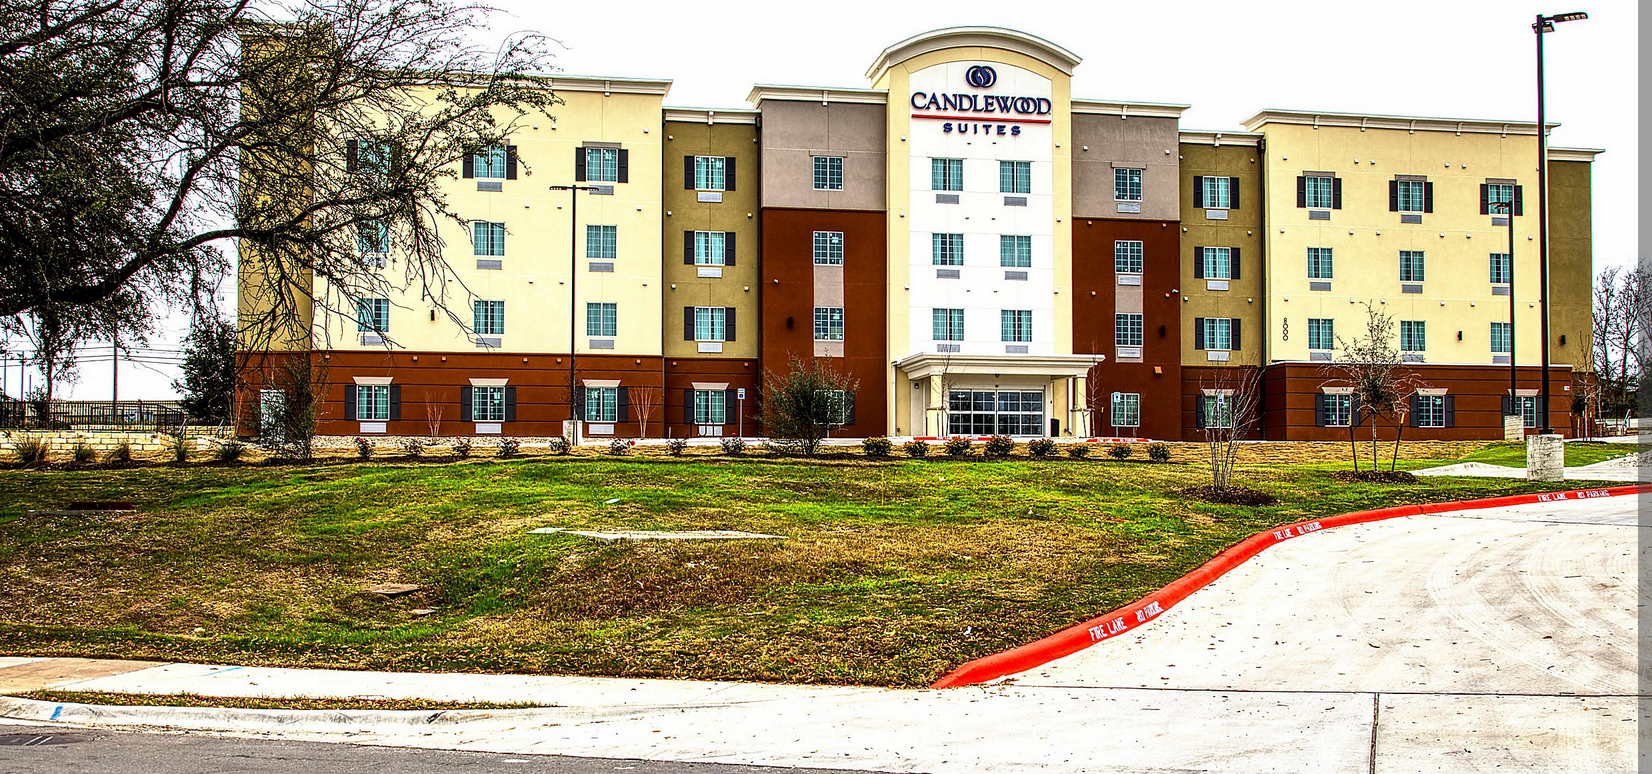 Pet Friendly Candlewood Suites Austin North 290 & I-35 in Austin, Texas